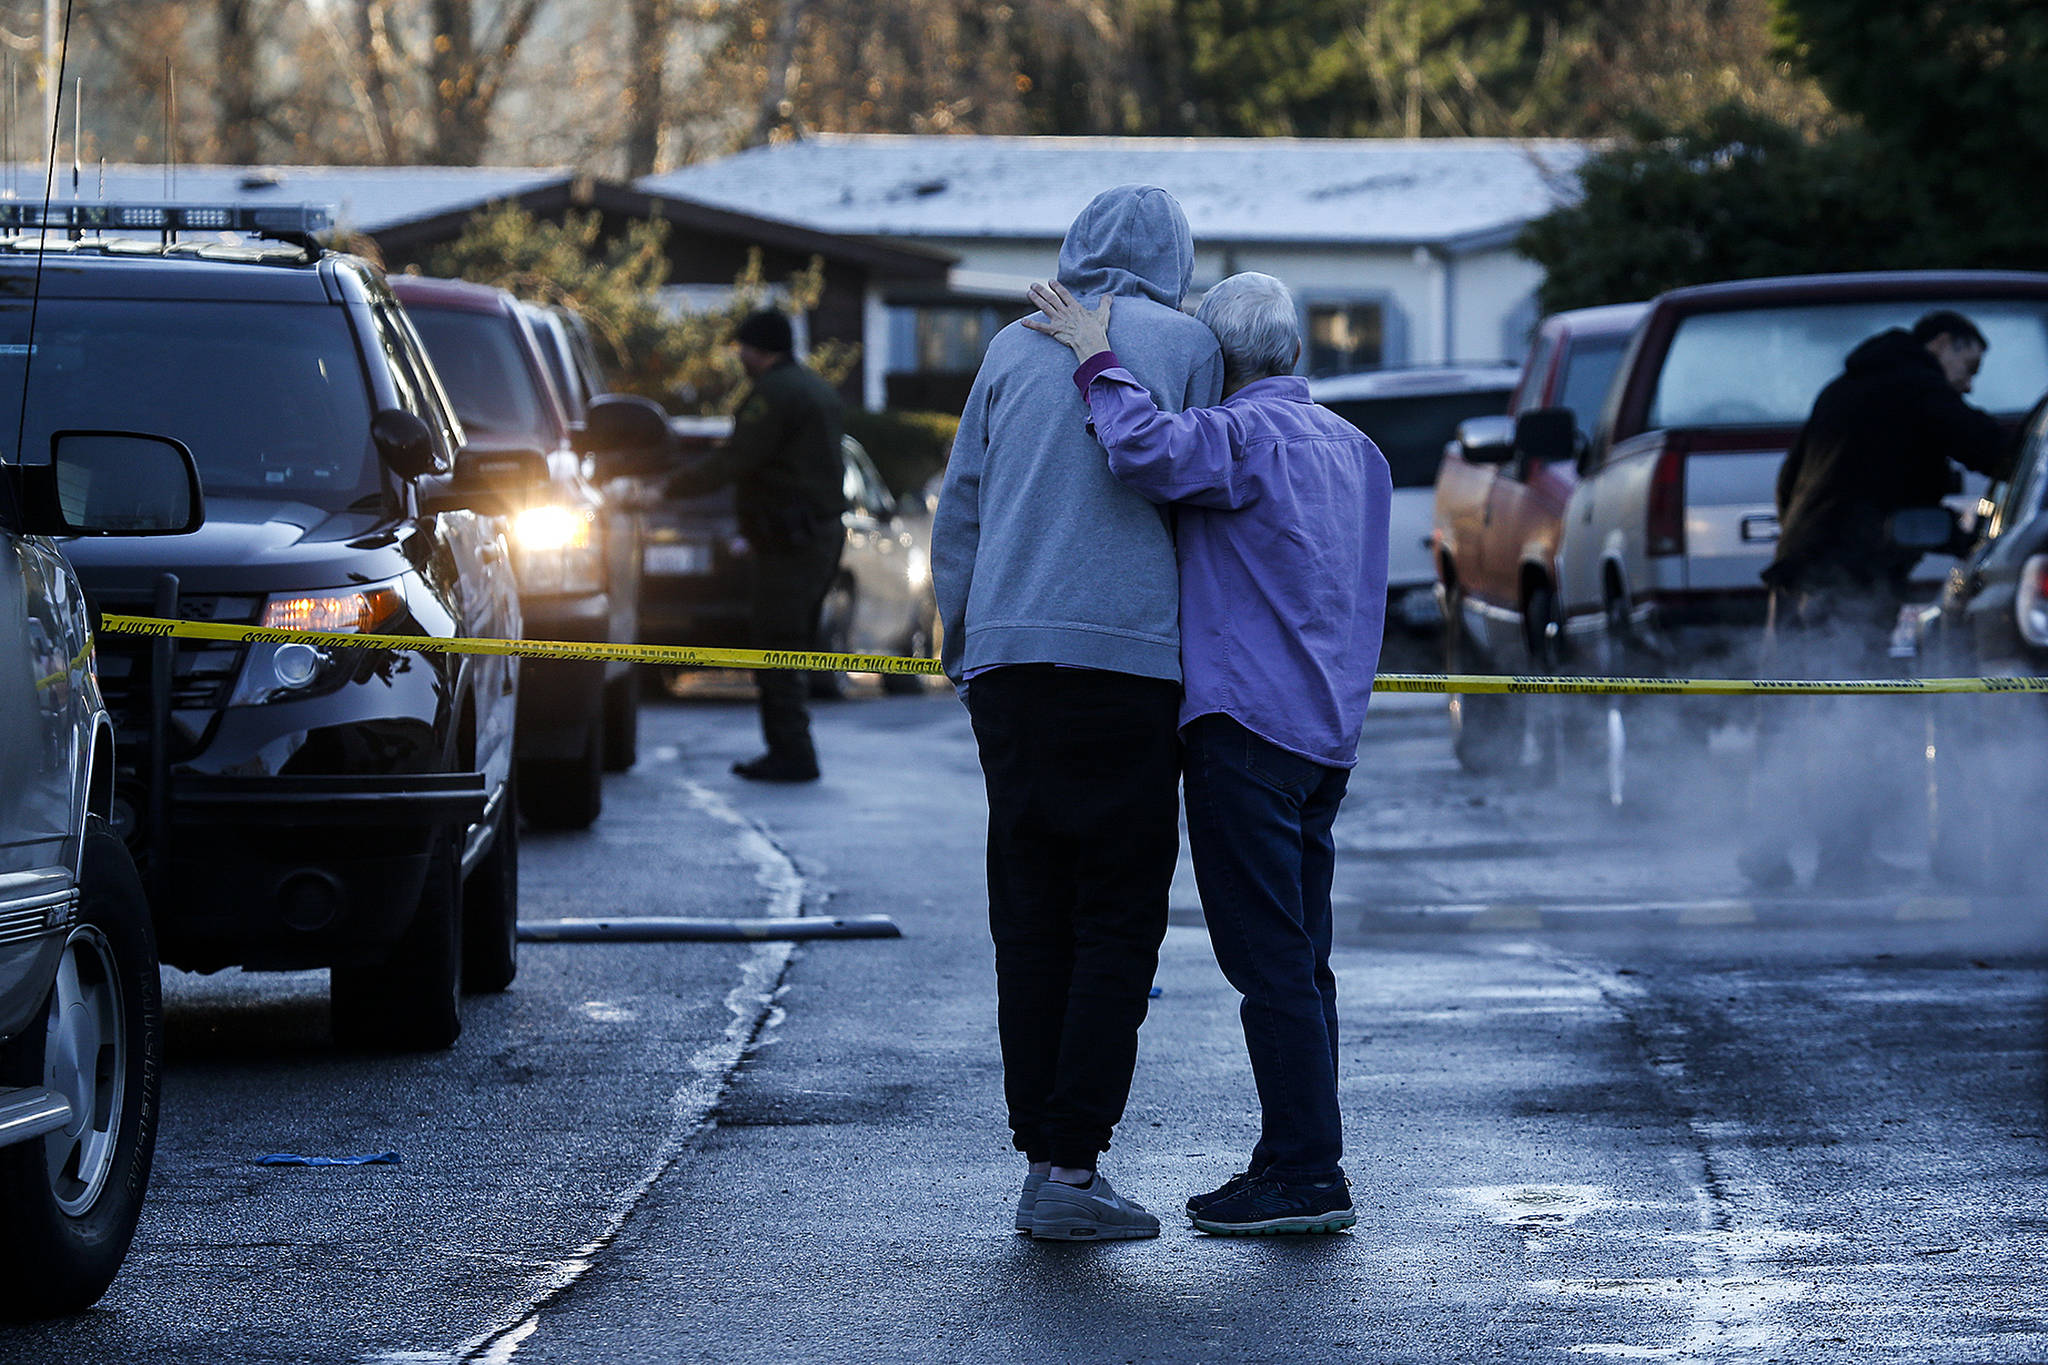 A man and woman embrace as they look towards a home where a 54-year old woman was shot and killed early Thursday morning in the Village Green Mobile Home Park near East Gibson Road in south Everett. (Ian Terry / The Herald)